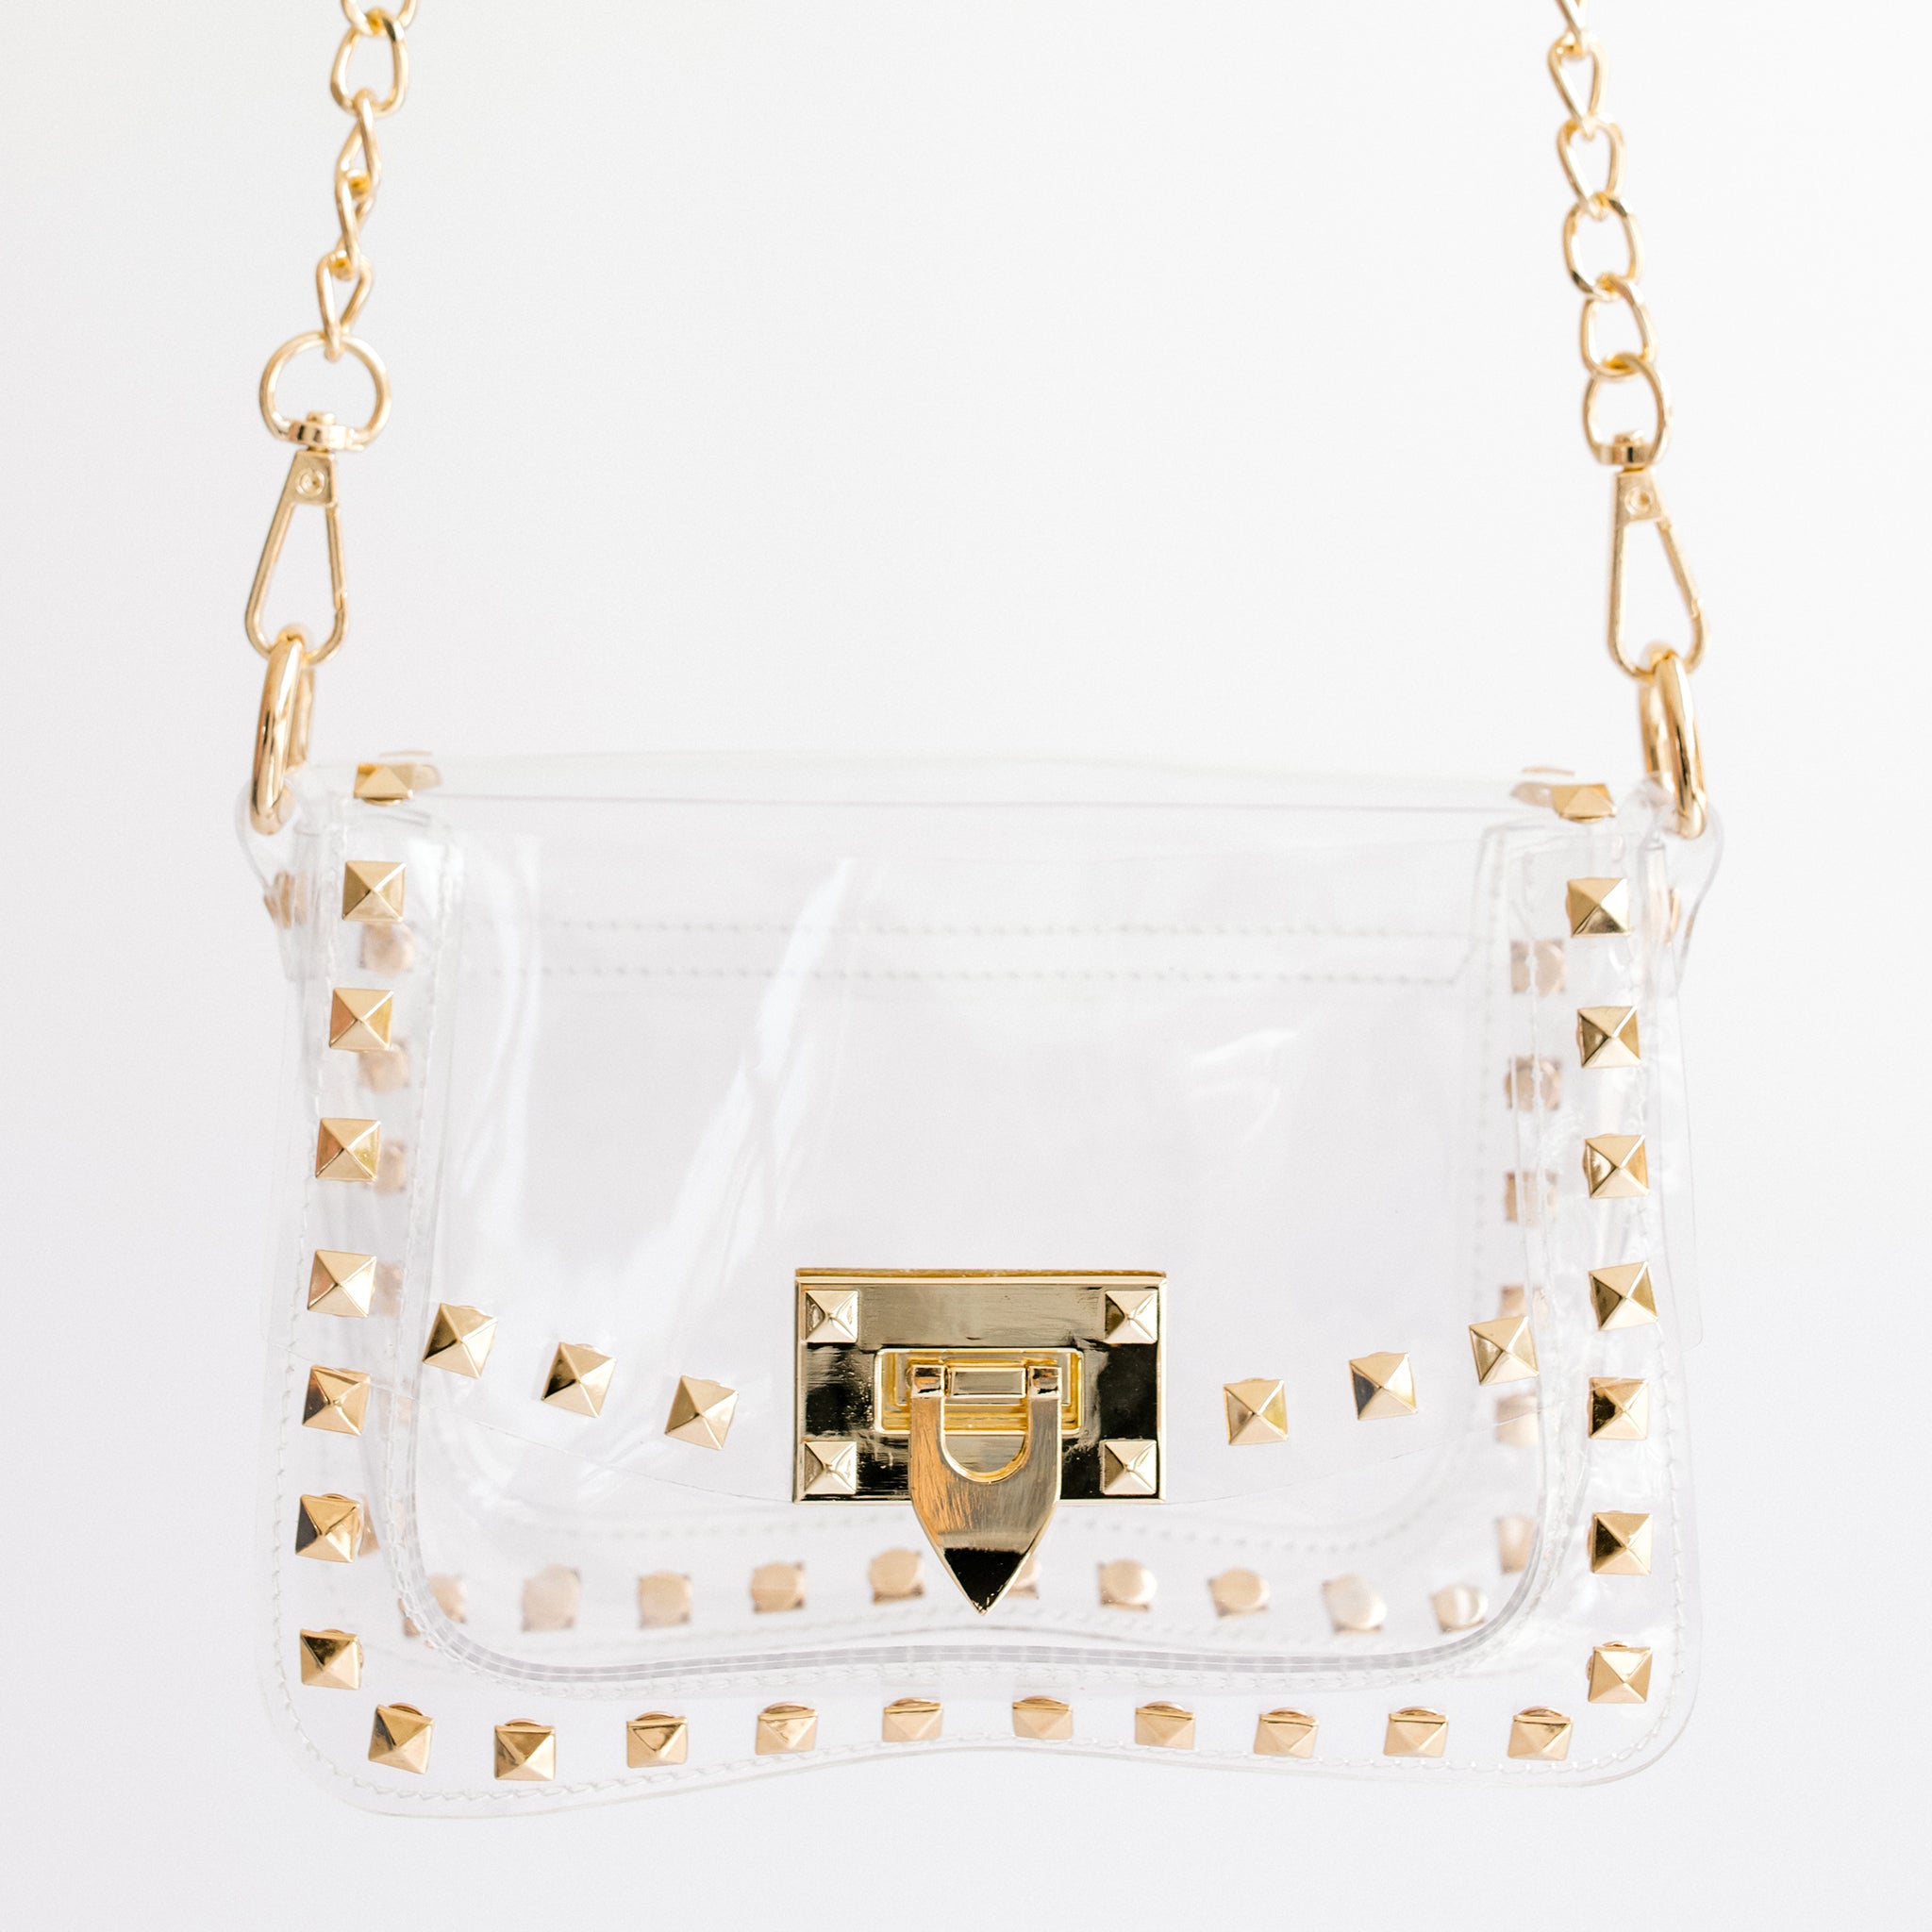 St John tan and clear plastic huge tote & small clutch gold tone key  hanger